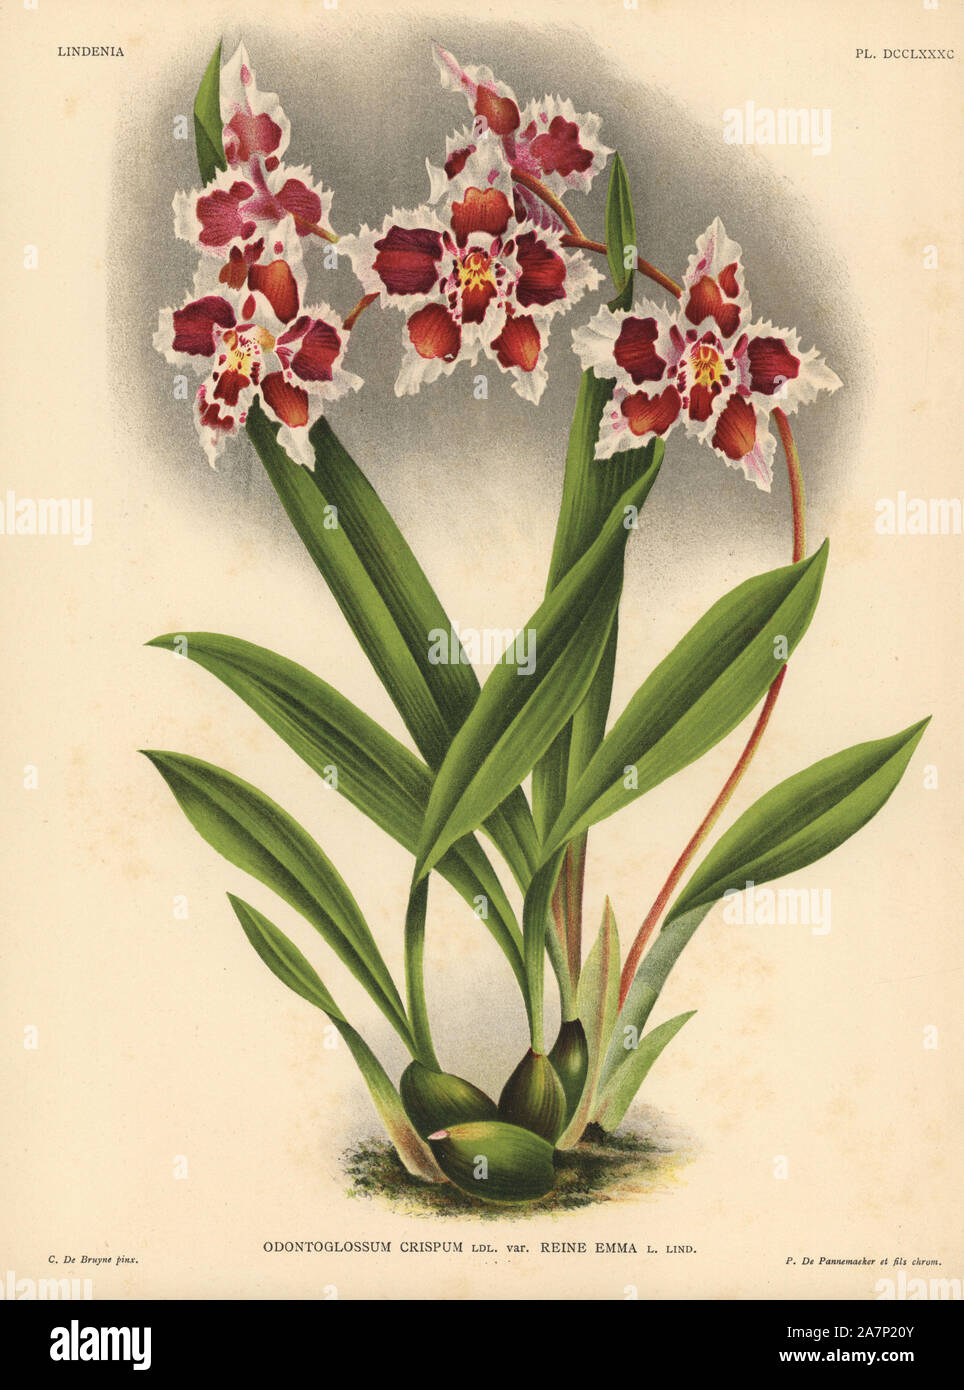 Queen Emma variety of Odontoglossum crispum orchid. Illustration drawn by C. de Bruyne and chromolithographed by P. de Pannemaeker et fils from Lucien Linden's 'Lindenia, Iconographie des Orchidees,' Brussels, 1902. Stock Photo